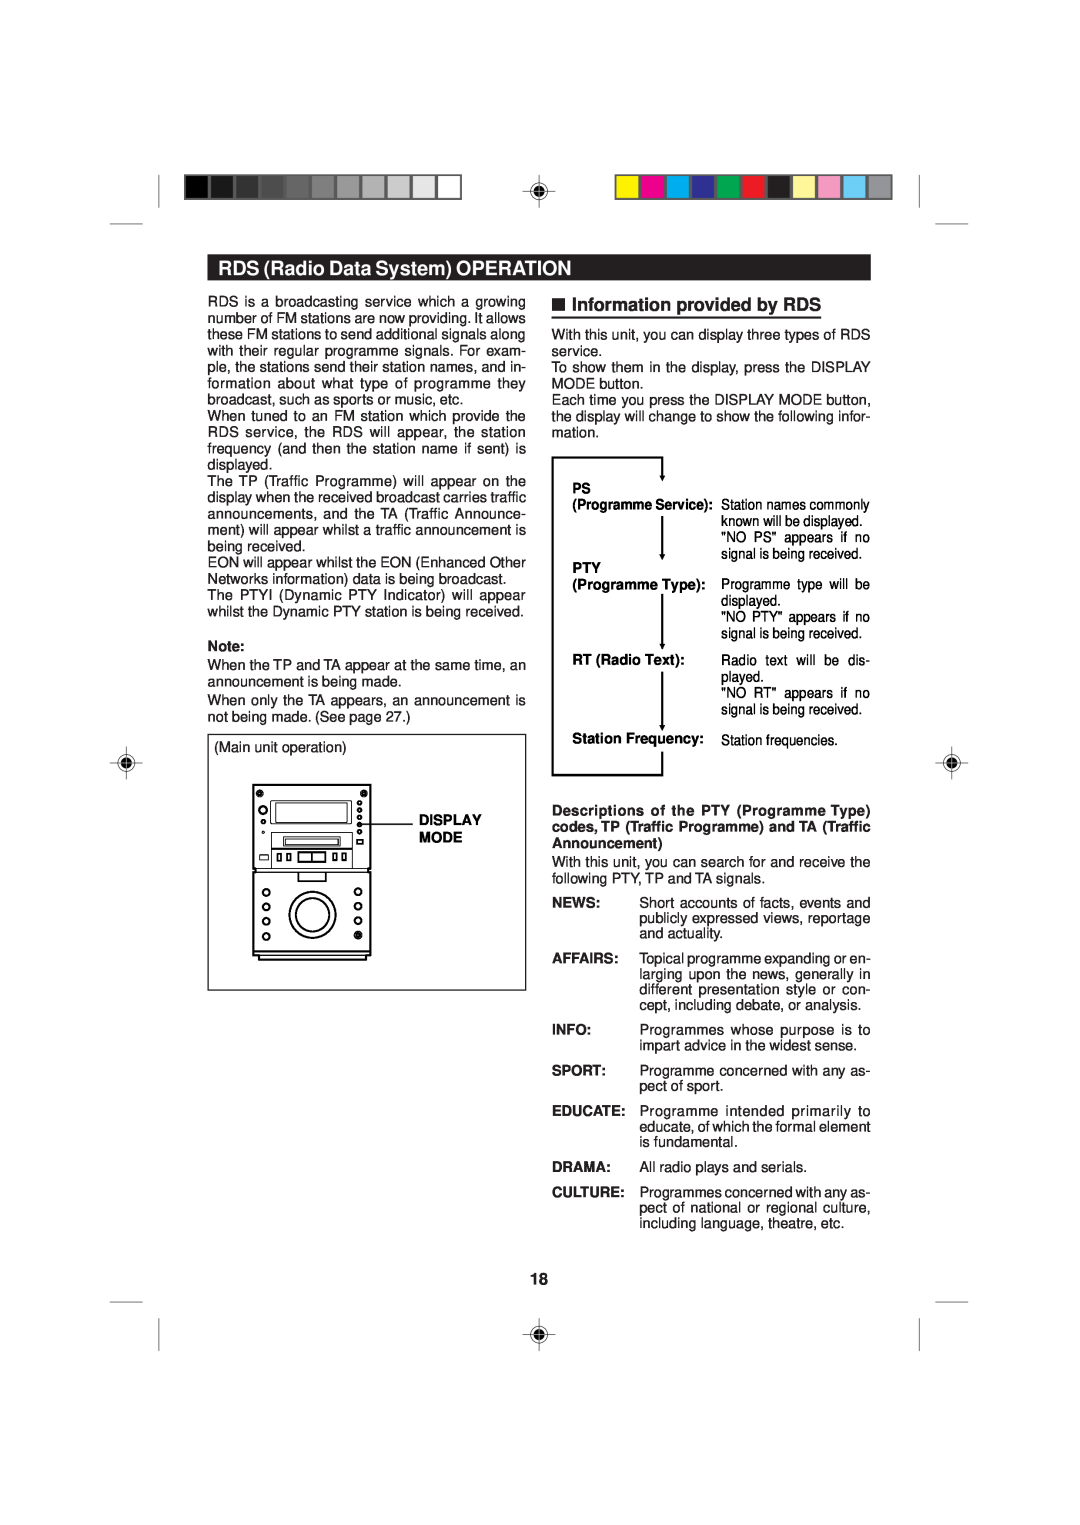 Sharp MD-M1H operation manual RDS Radio Data System OPERATION, Information provided by RDS 